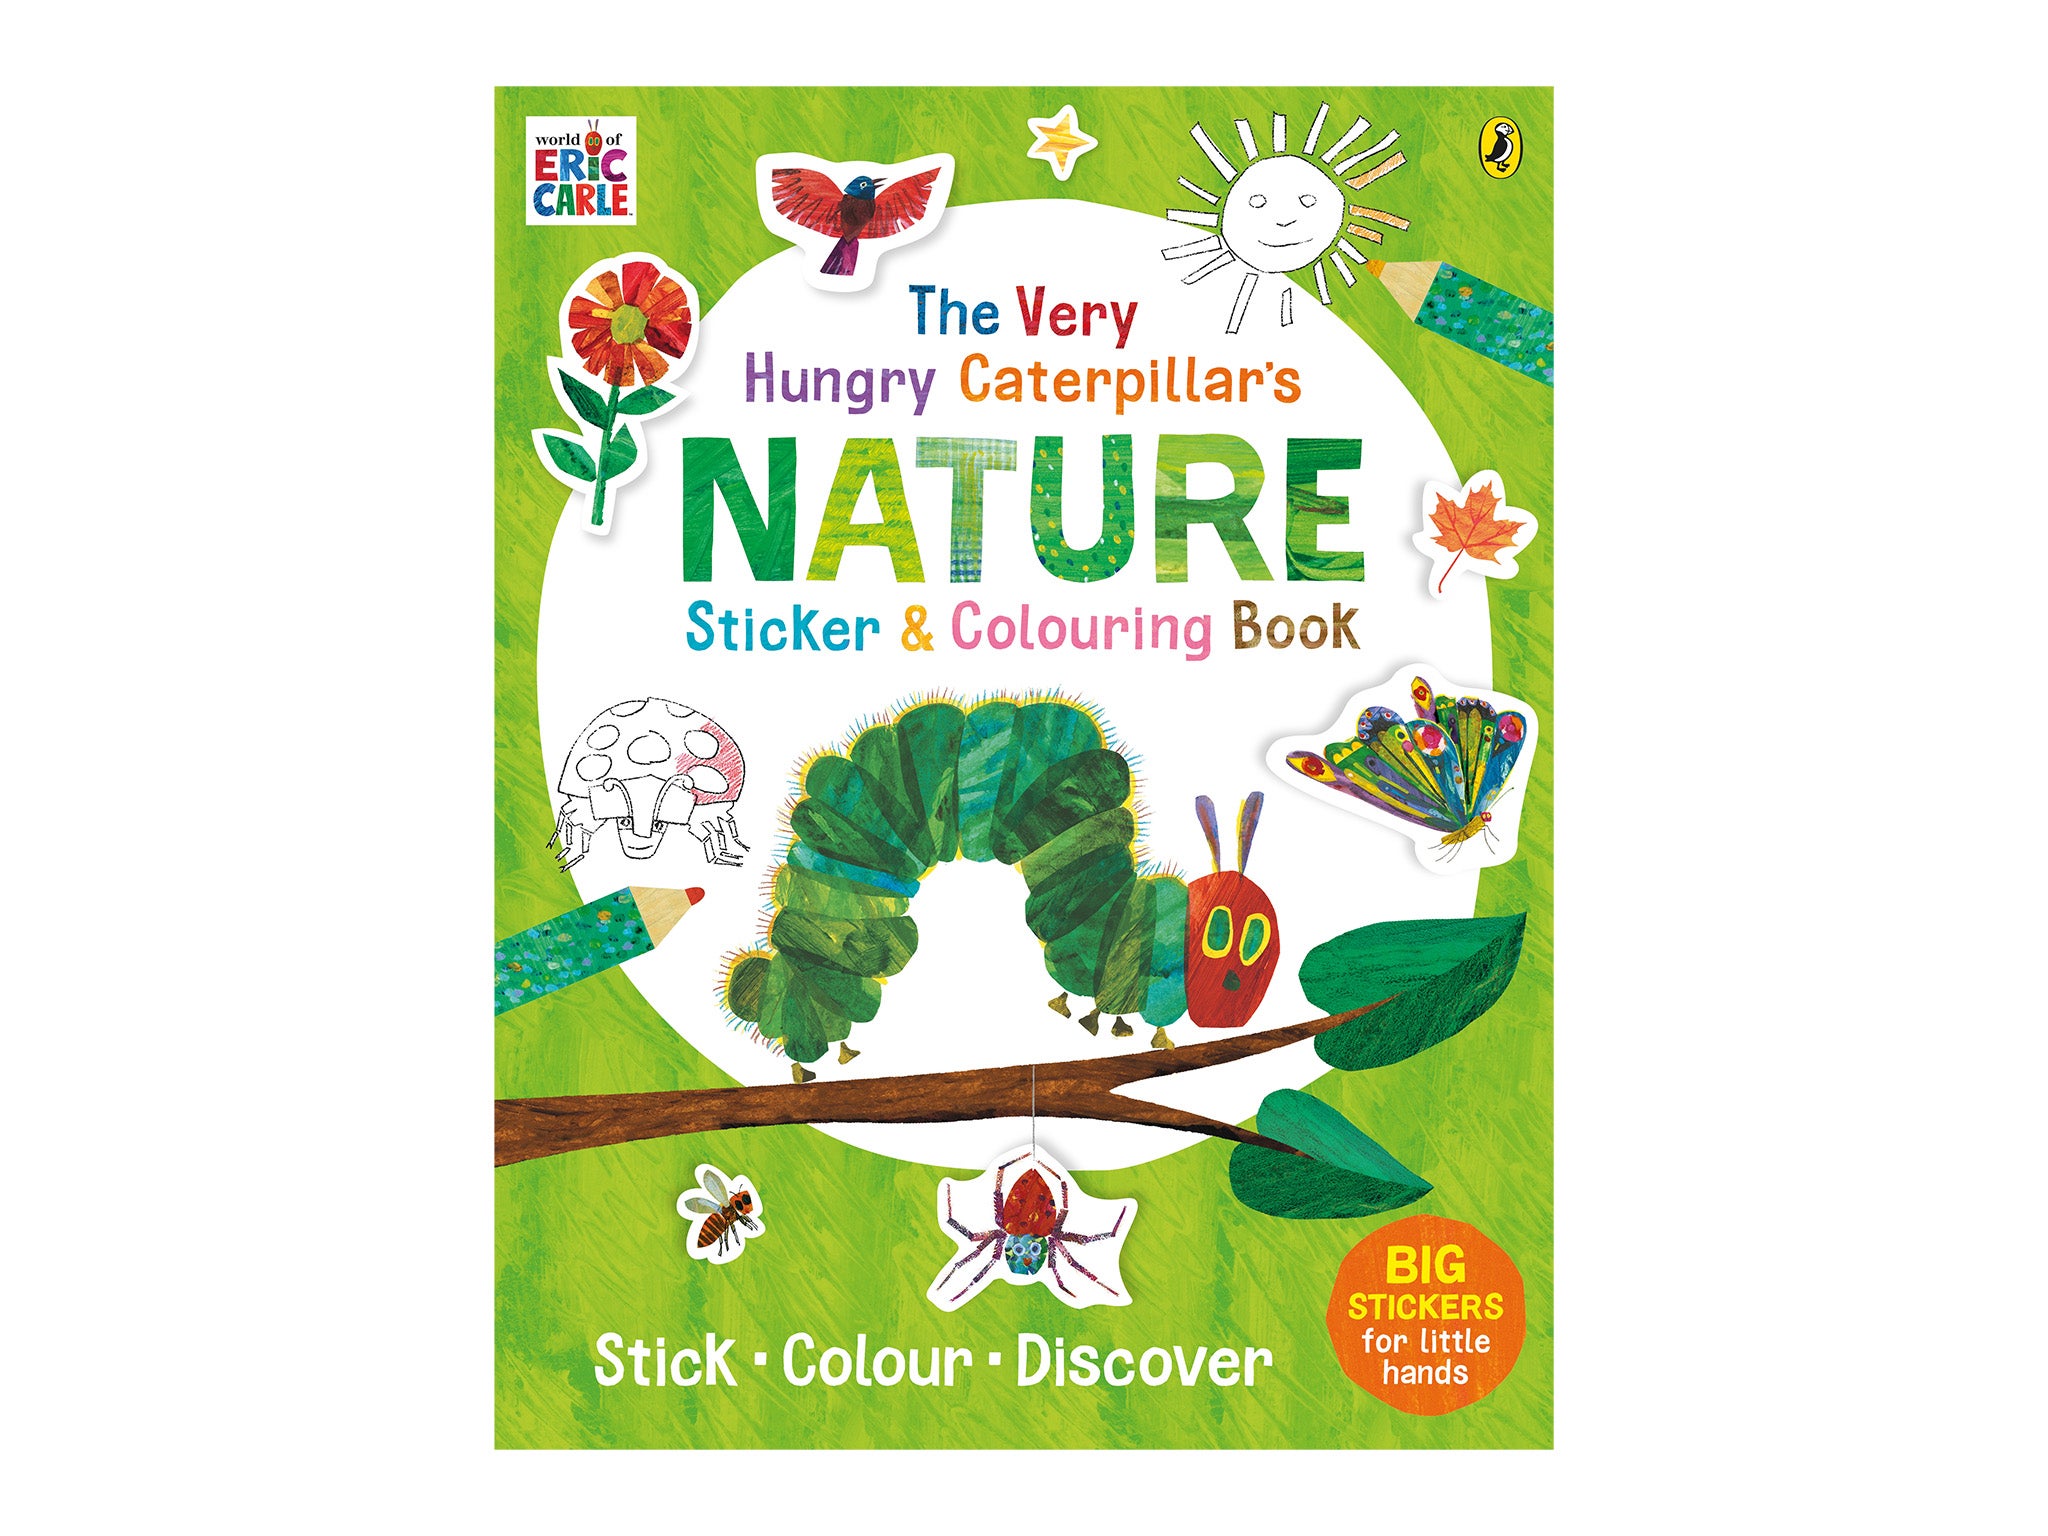 The Very Hungry Caterpillar’s Nature Sticker and Colouring Book, published by Puffin .jpg